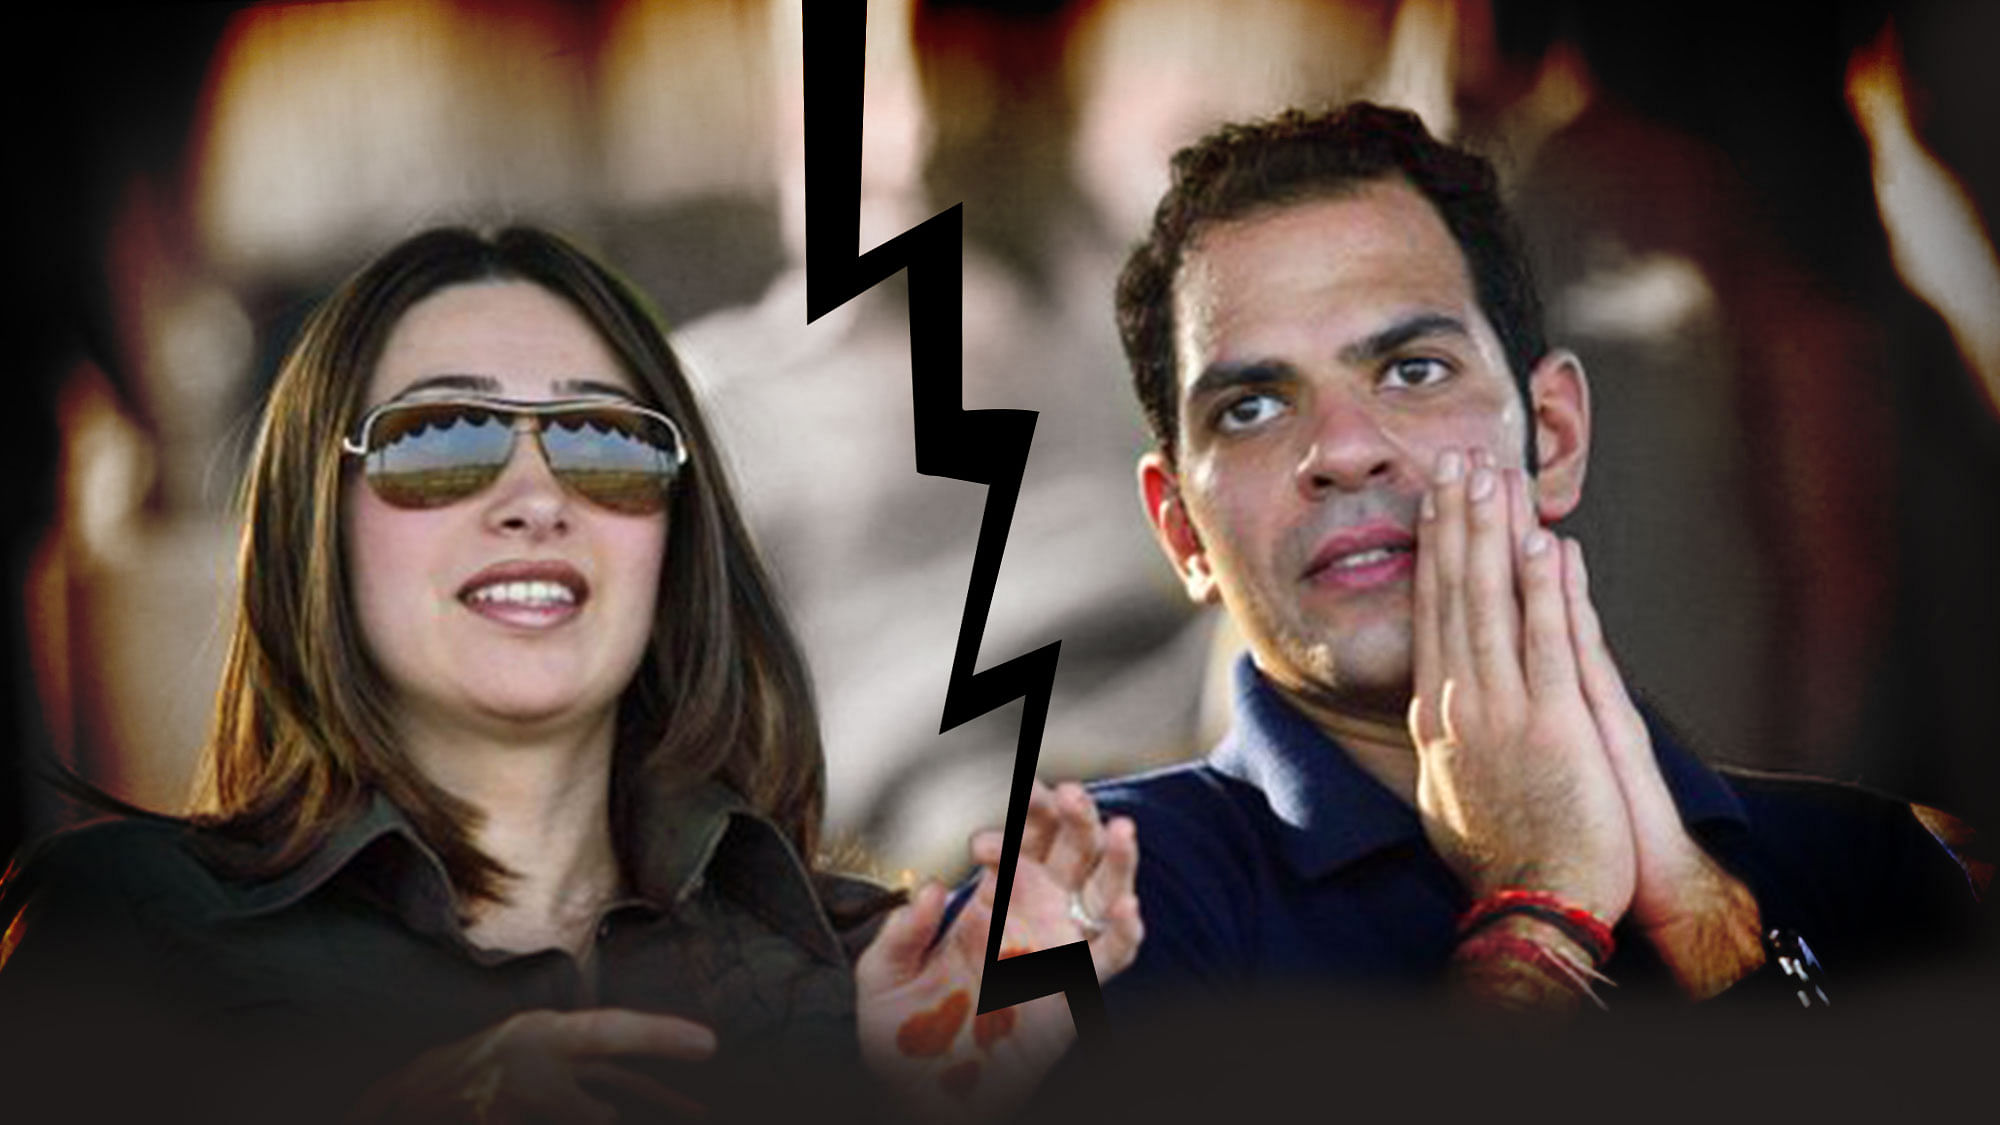 Karisma Kapoor and Sunjay Kapur’s divorce battles is getting uglier and uglier. (Photo Courtesy: <a href="https://twitter.com/dynamitenews24/status/682212045165445124">Twitter/@dynamitenews24</a>; Image altered by <b>The Quint</b>)